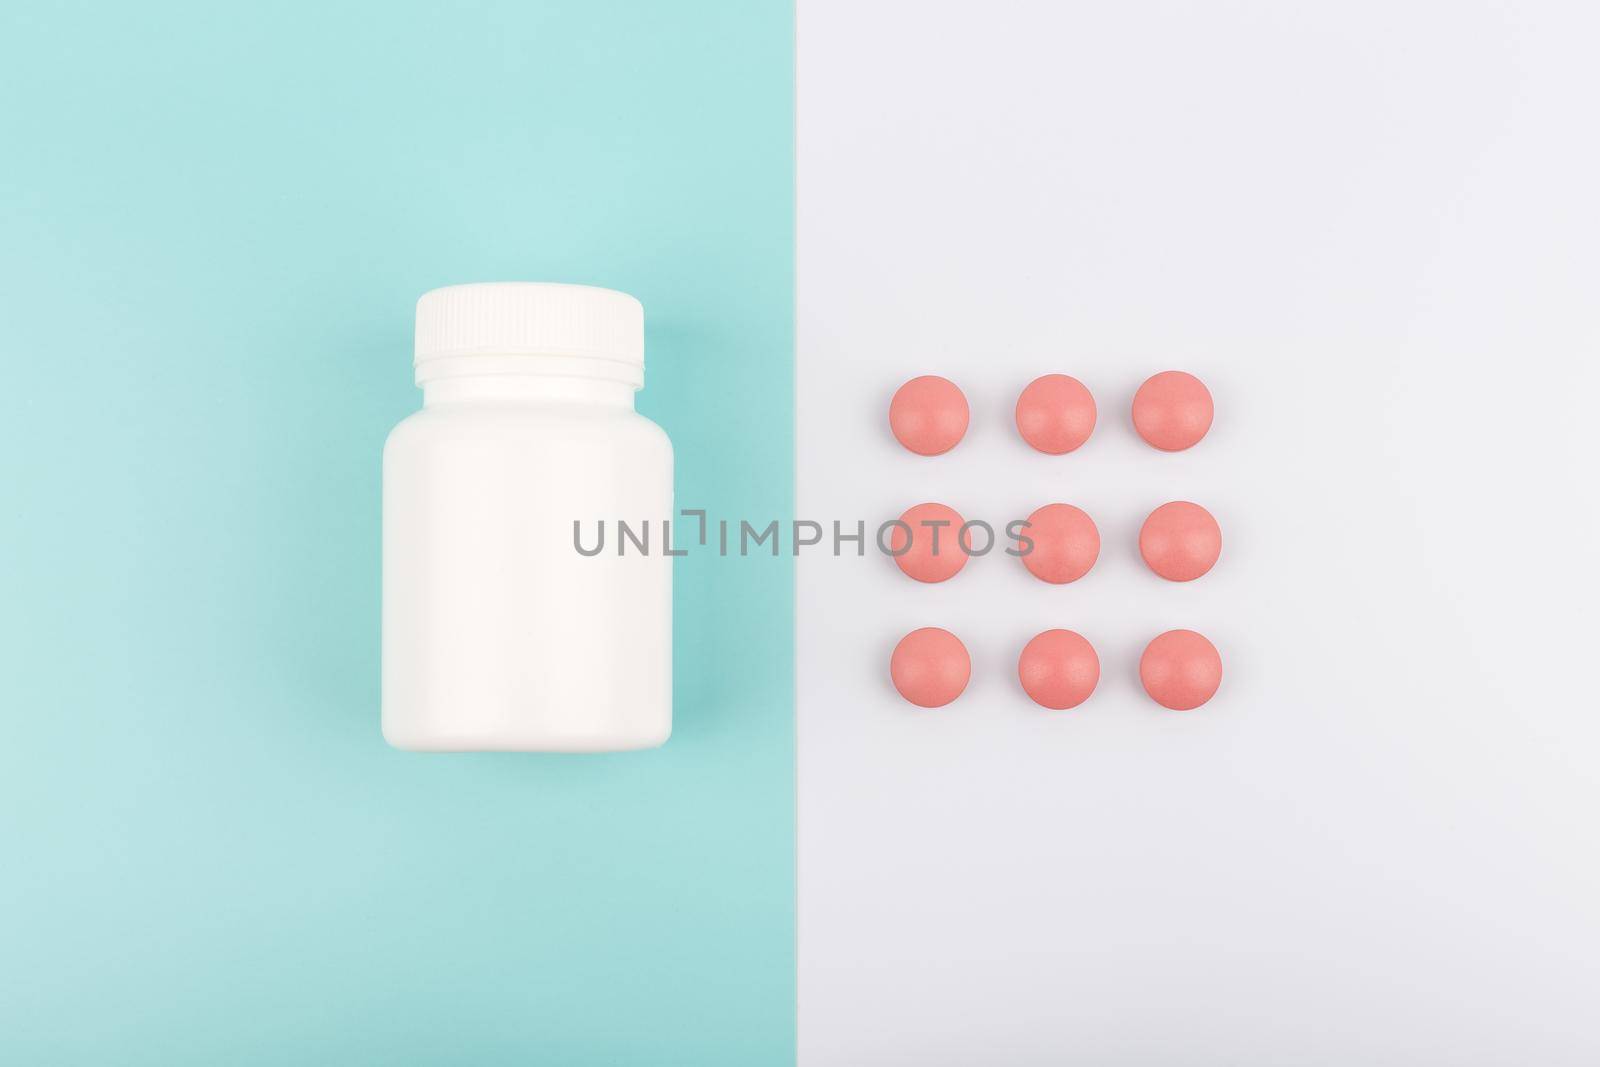 Flat lay with white glossy medication bottle and red round pills on blue and white background in light tones by Senorina_Irina